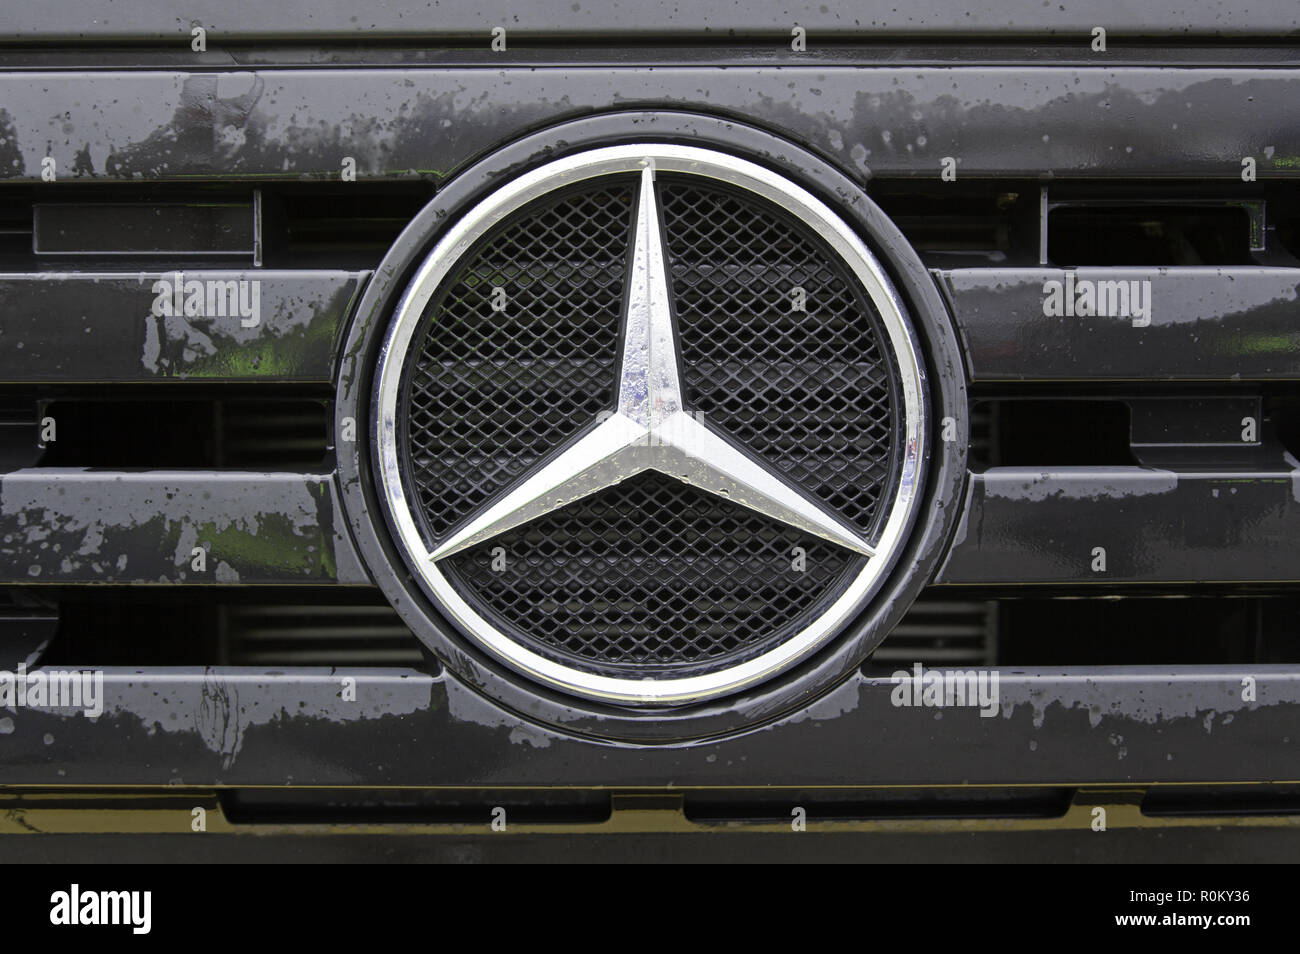 Mercedes benz truck, mercedes badge detail dipped in a truck racing Stock Photo